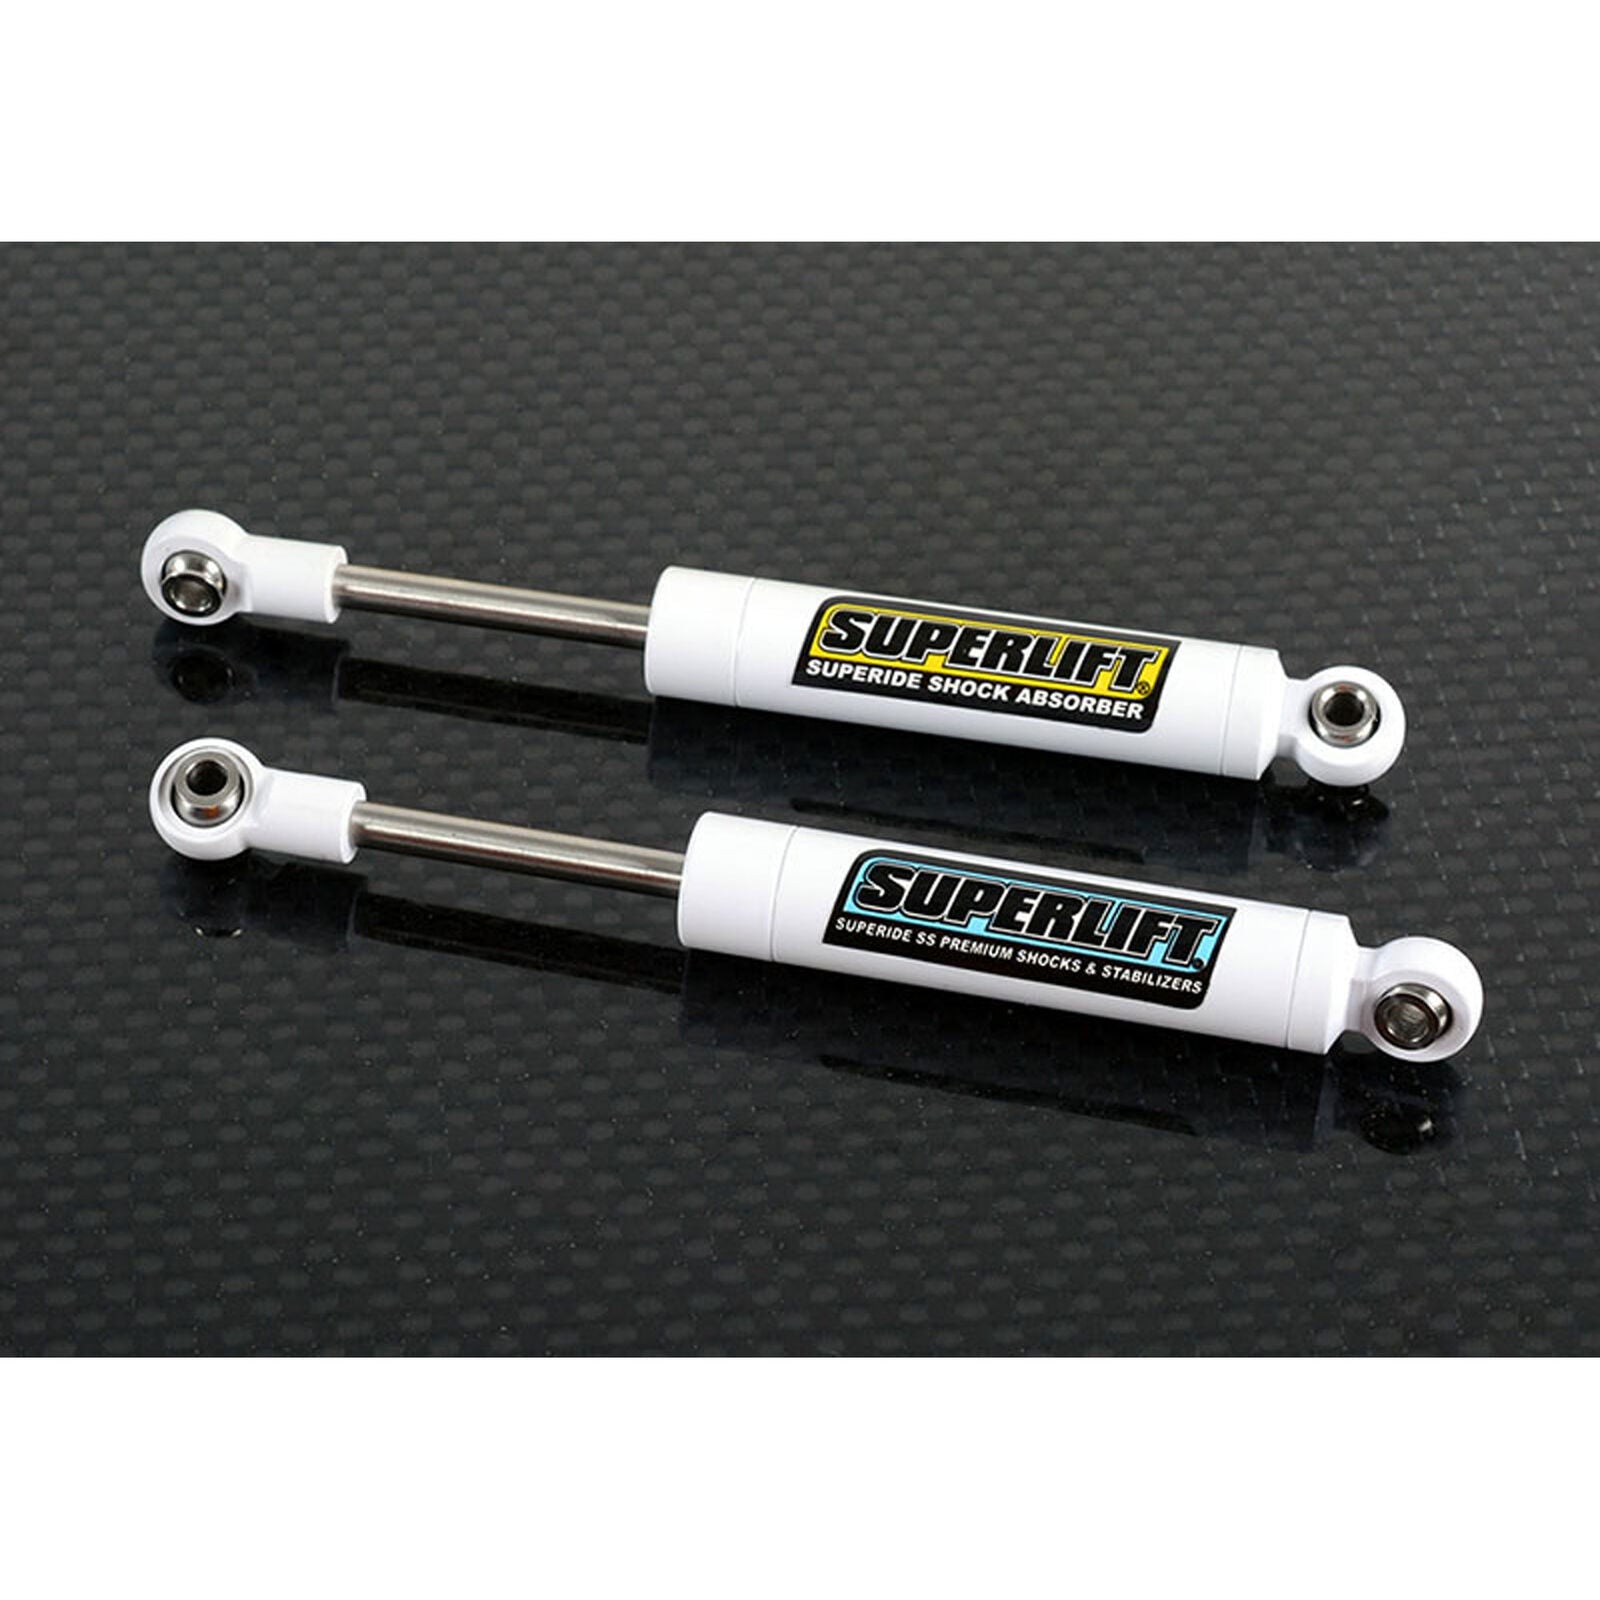 RC4WD Z-D0015 Superlift Superide 90mm Scale Shock Absorbers